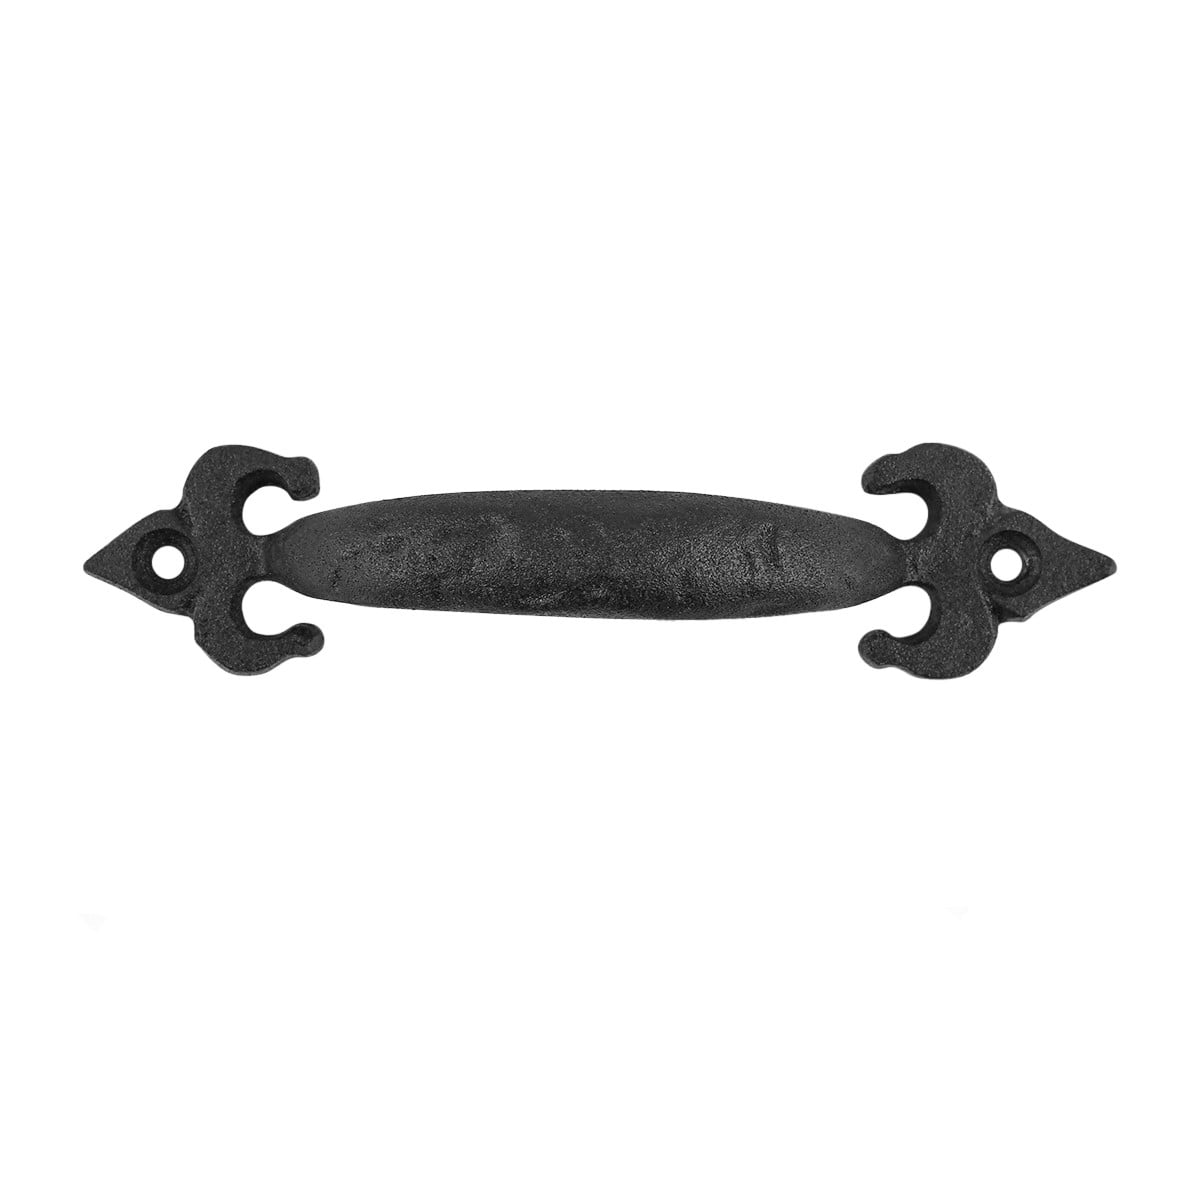 4 BROWN ANTIQUE-STYLE 6.5" CAST IRON DECORATIVE DRAWER DOOR CABINET PULL HANDLE 